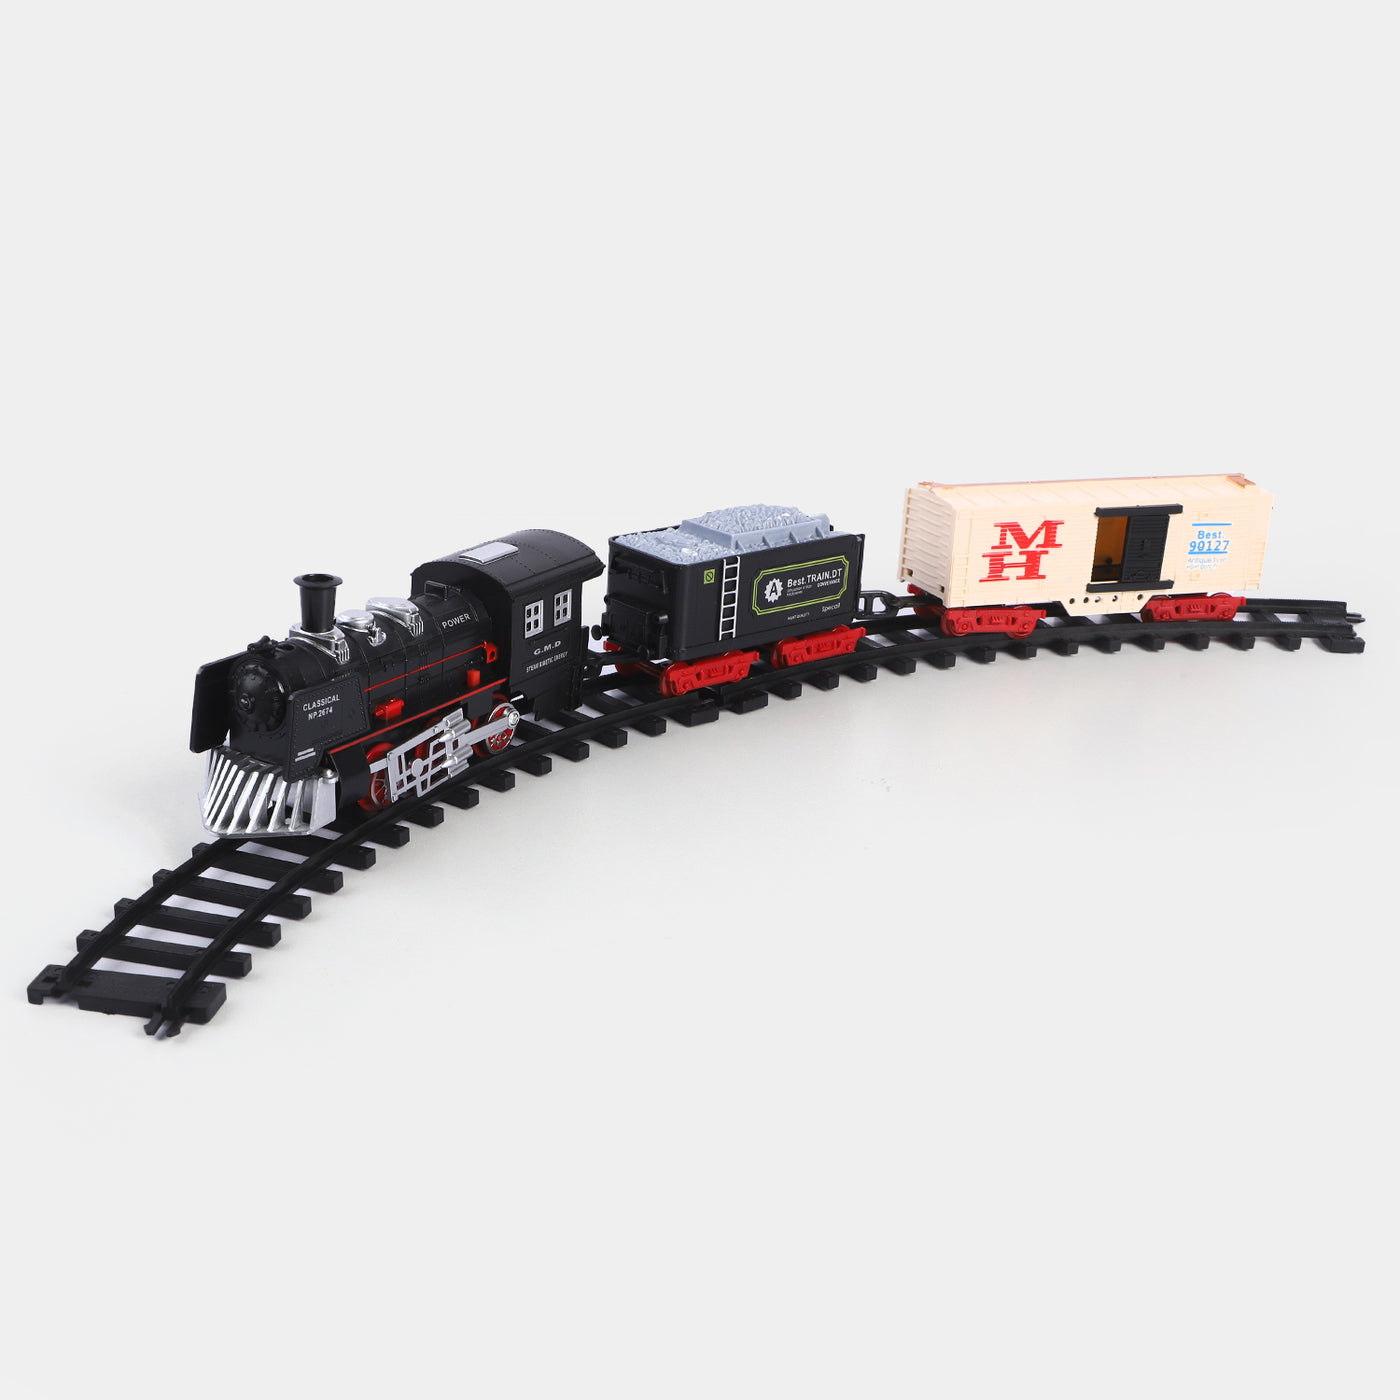 Train With Light & Sound For Kids